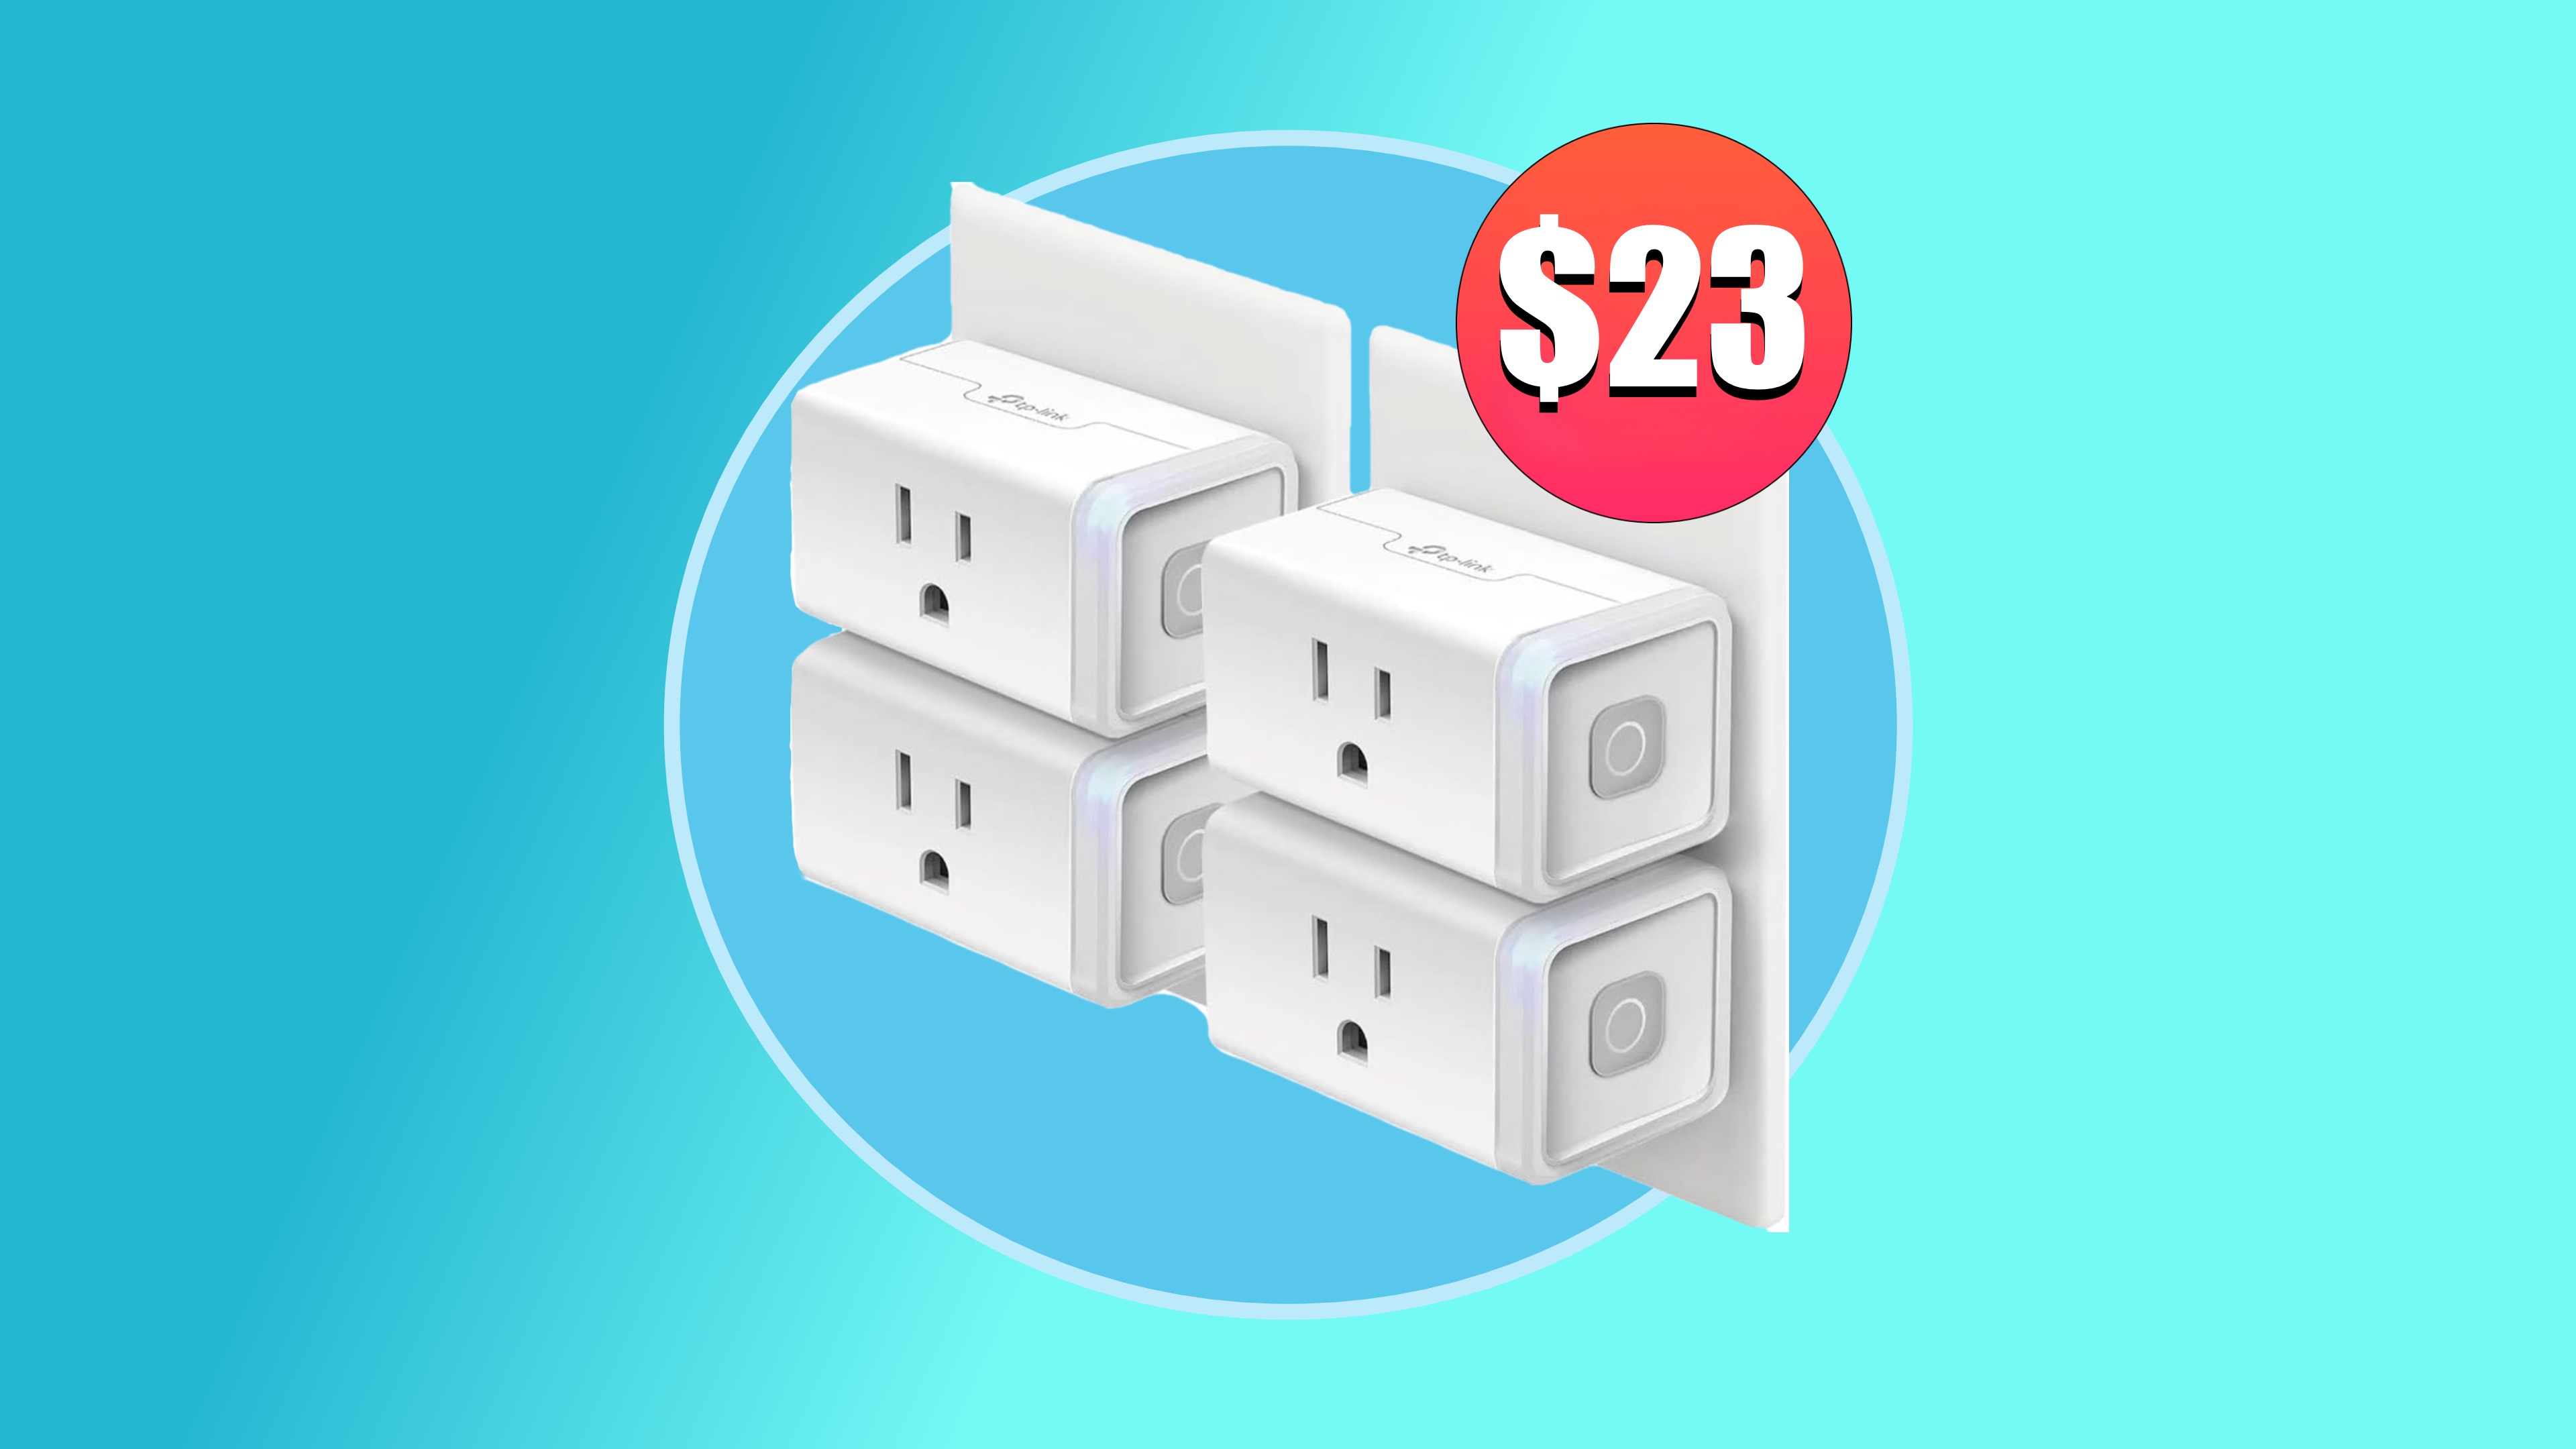 Don’t miss your chance to get this 4-pack of Kasa smart plugs for just $23